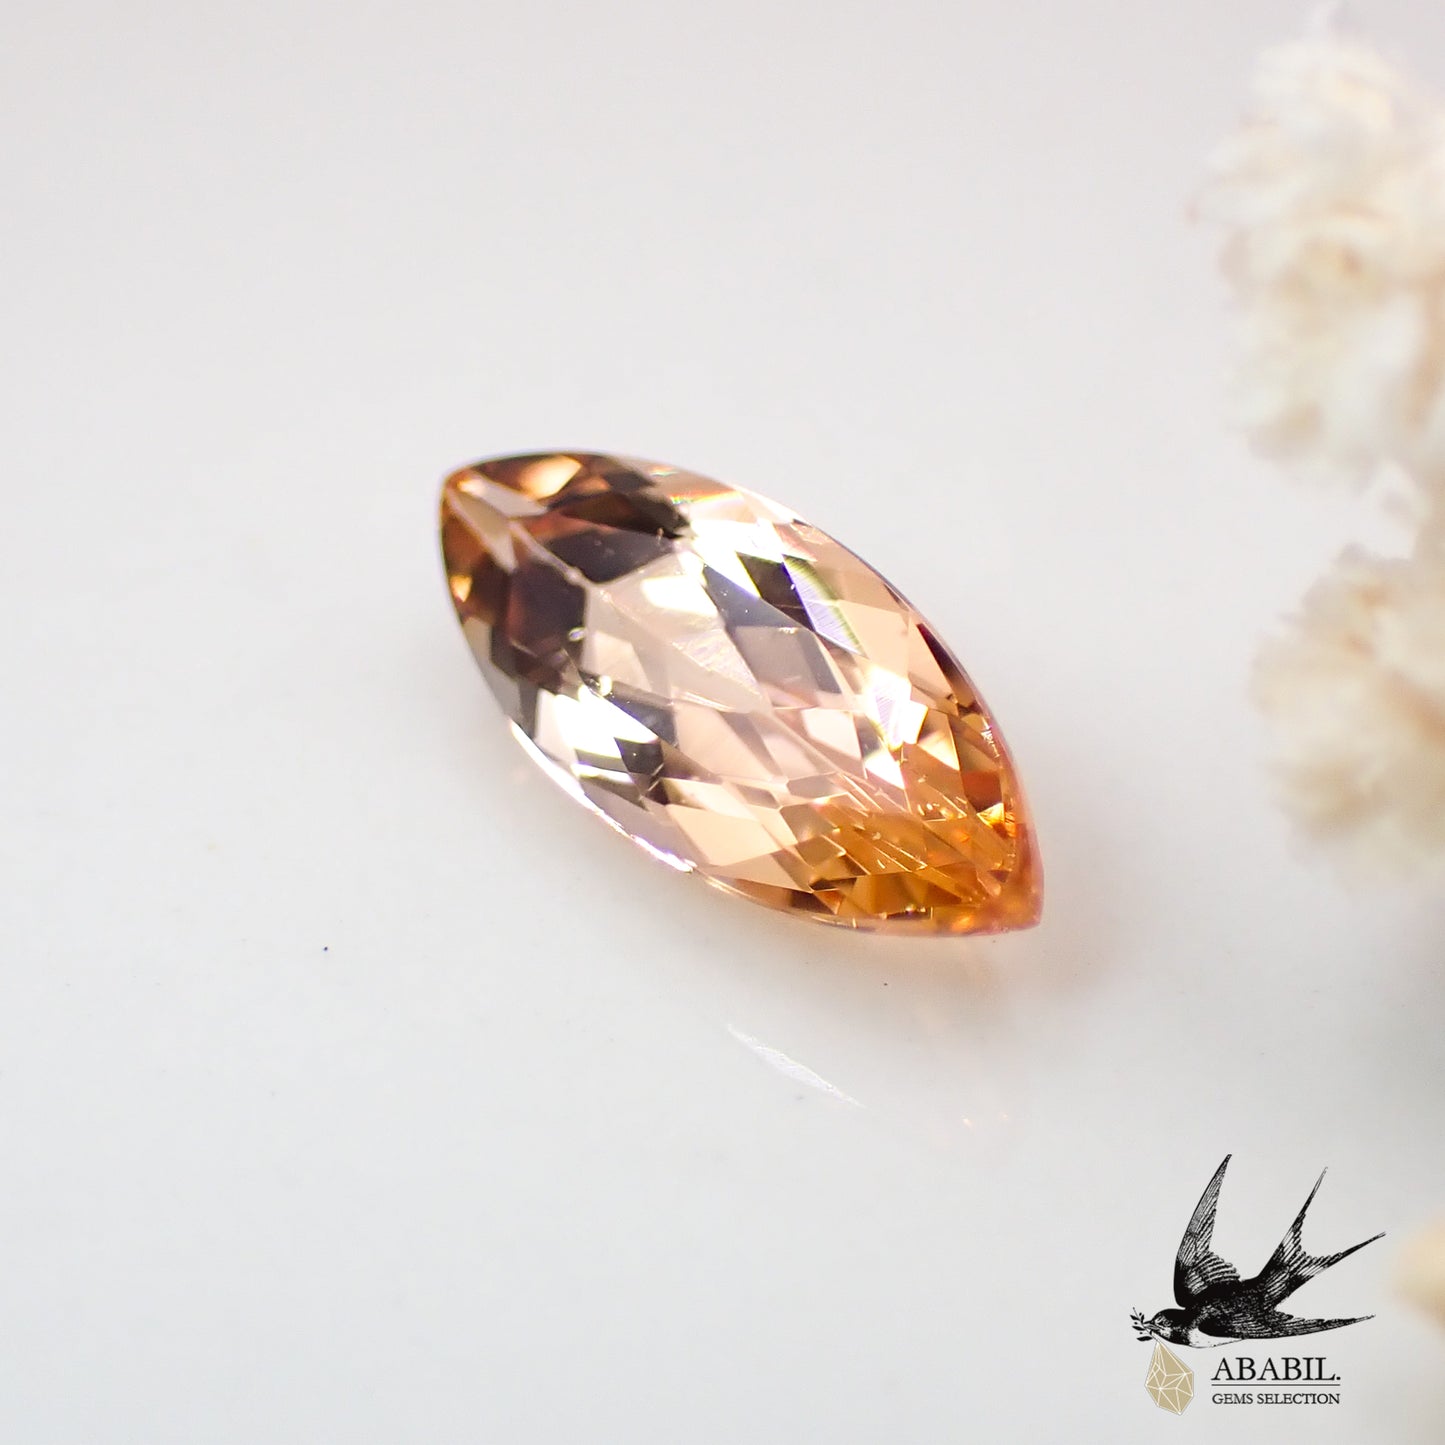 Natural unheated Imperial Topaz 0.786ct [Brazil] OH type sherry 